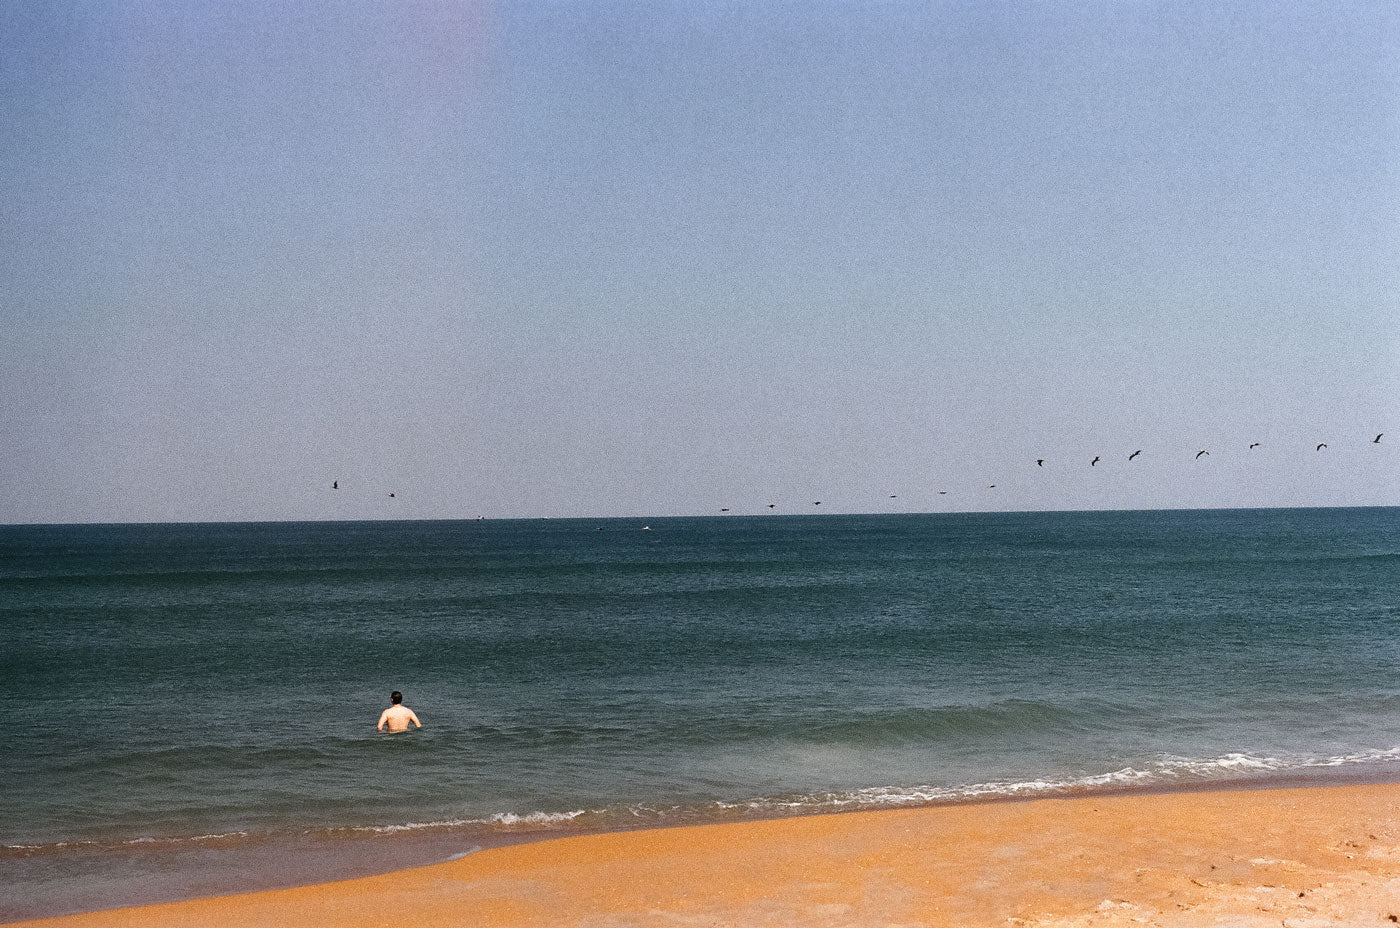 Photograph of person standing in the ocean on a beach